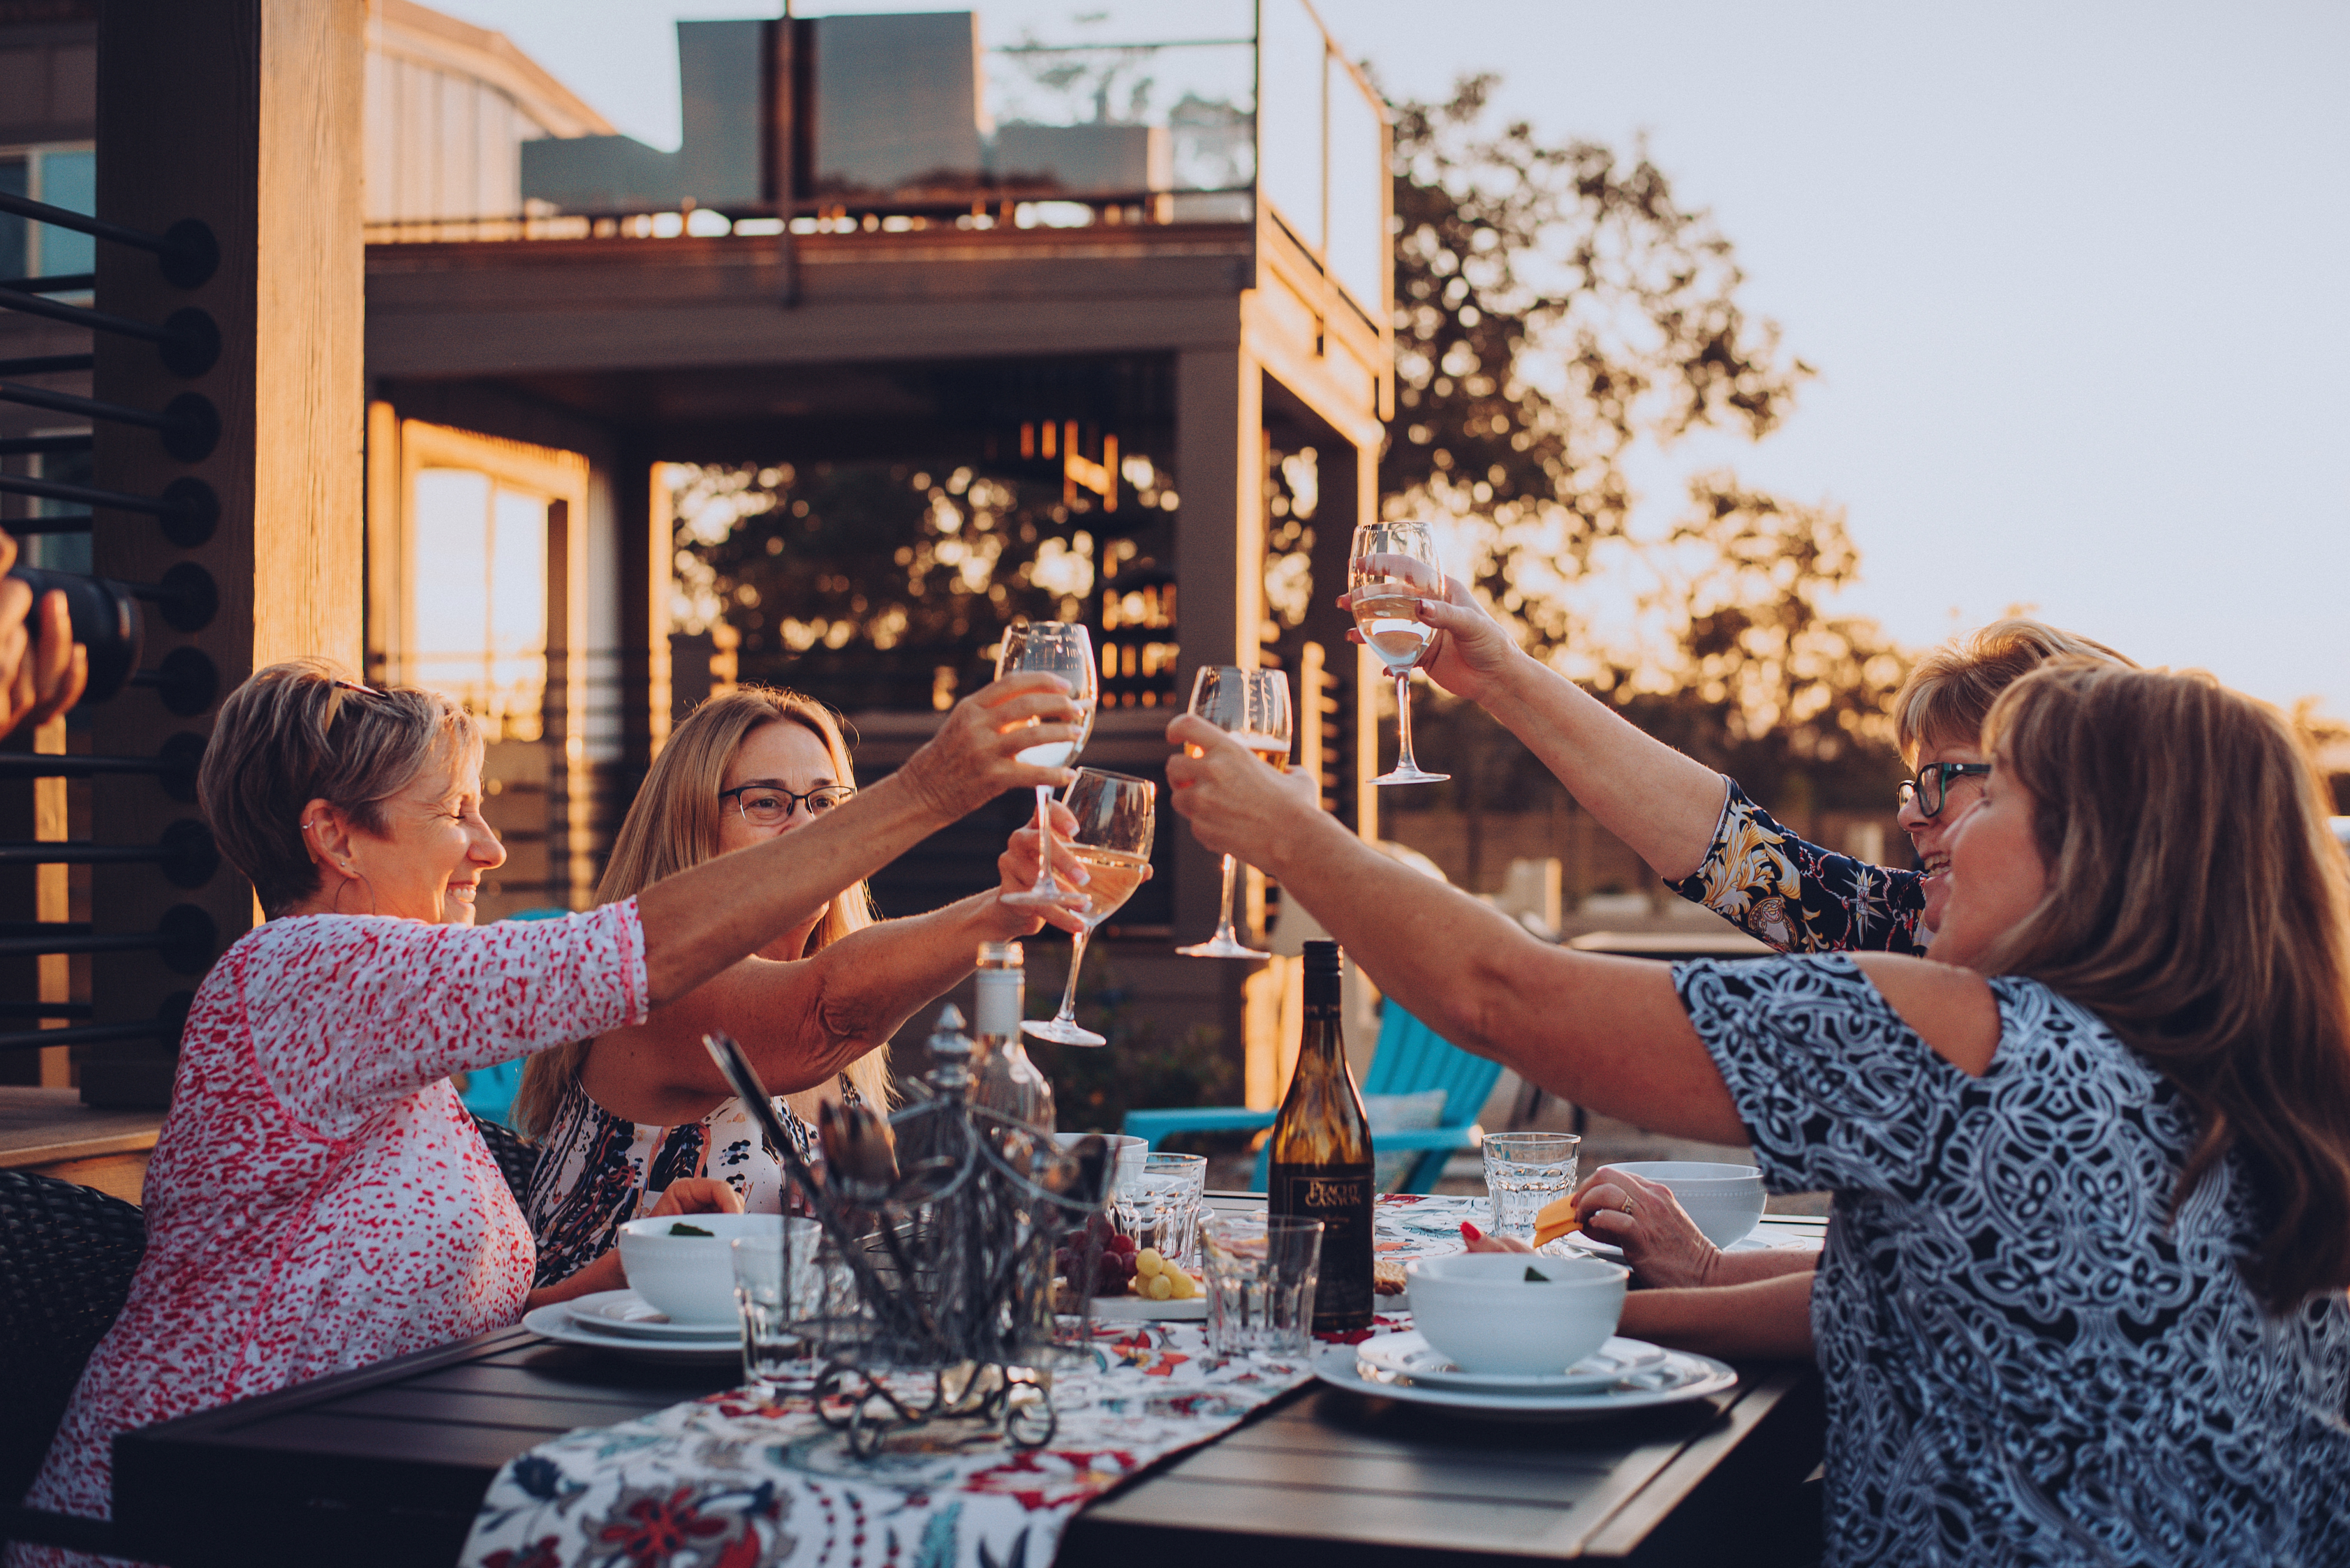 Four ladies raise glasses of white wine for a toast on an outdoor patio.